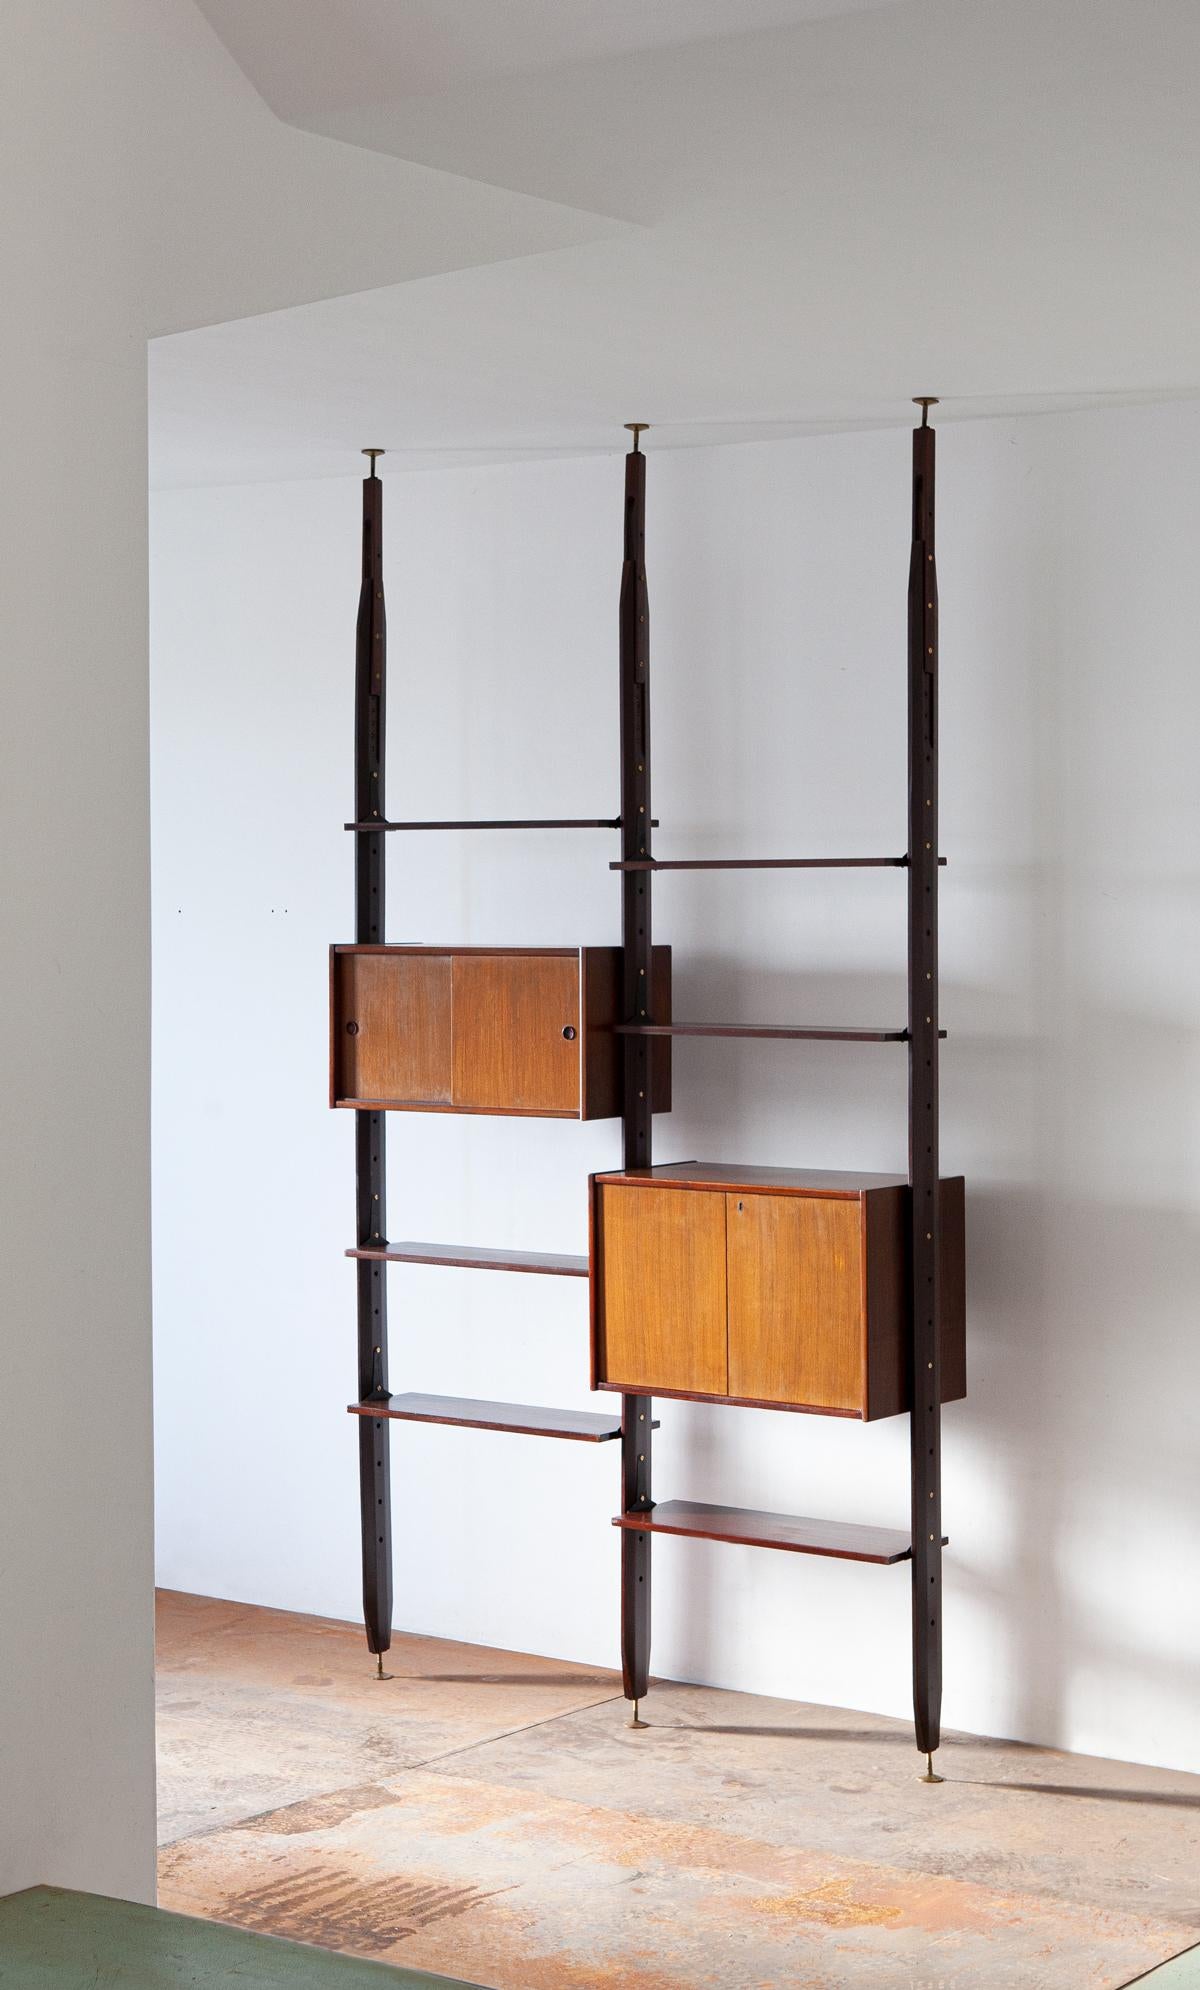 Floor to Ceiling Wall Unit, Exotic Wood, 1950s Italian Modern Design  1